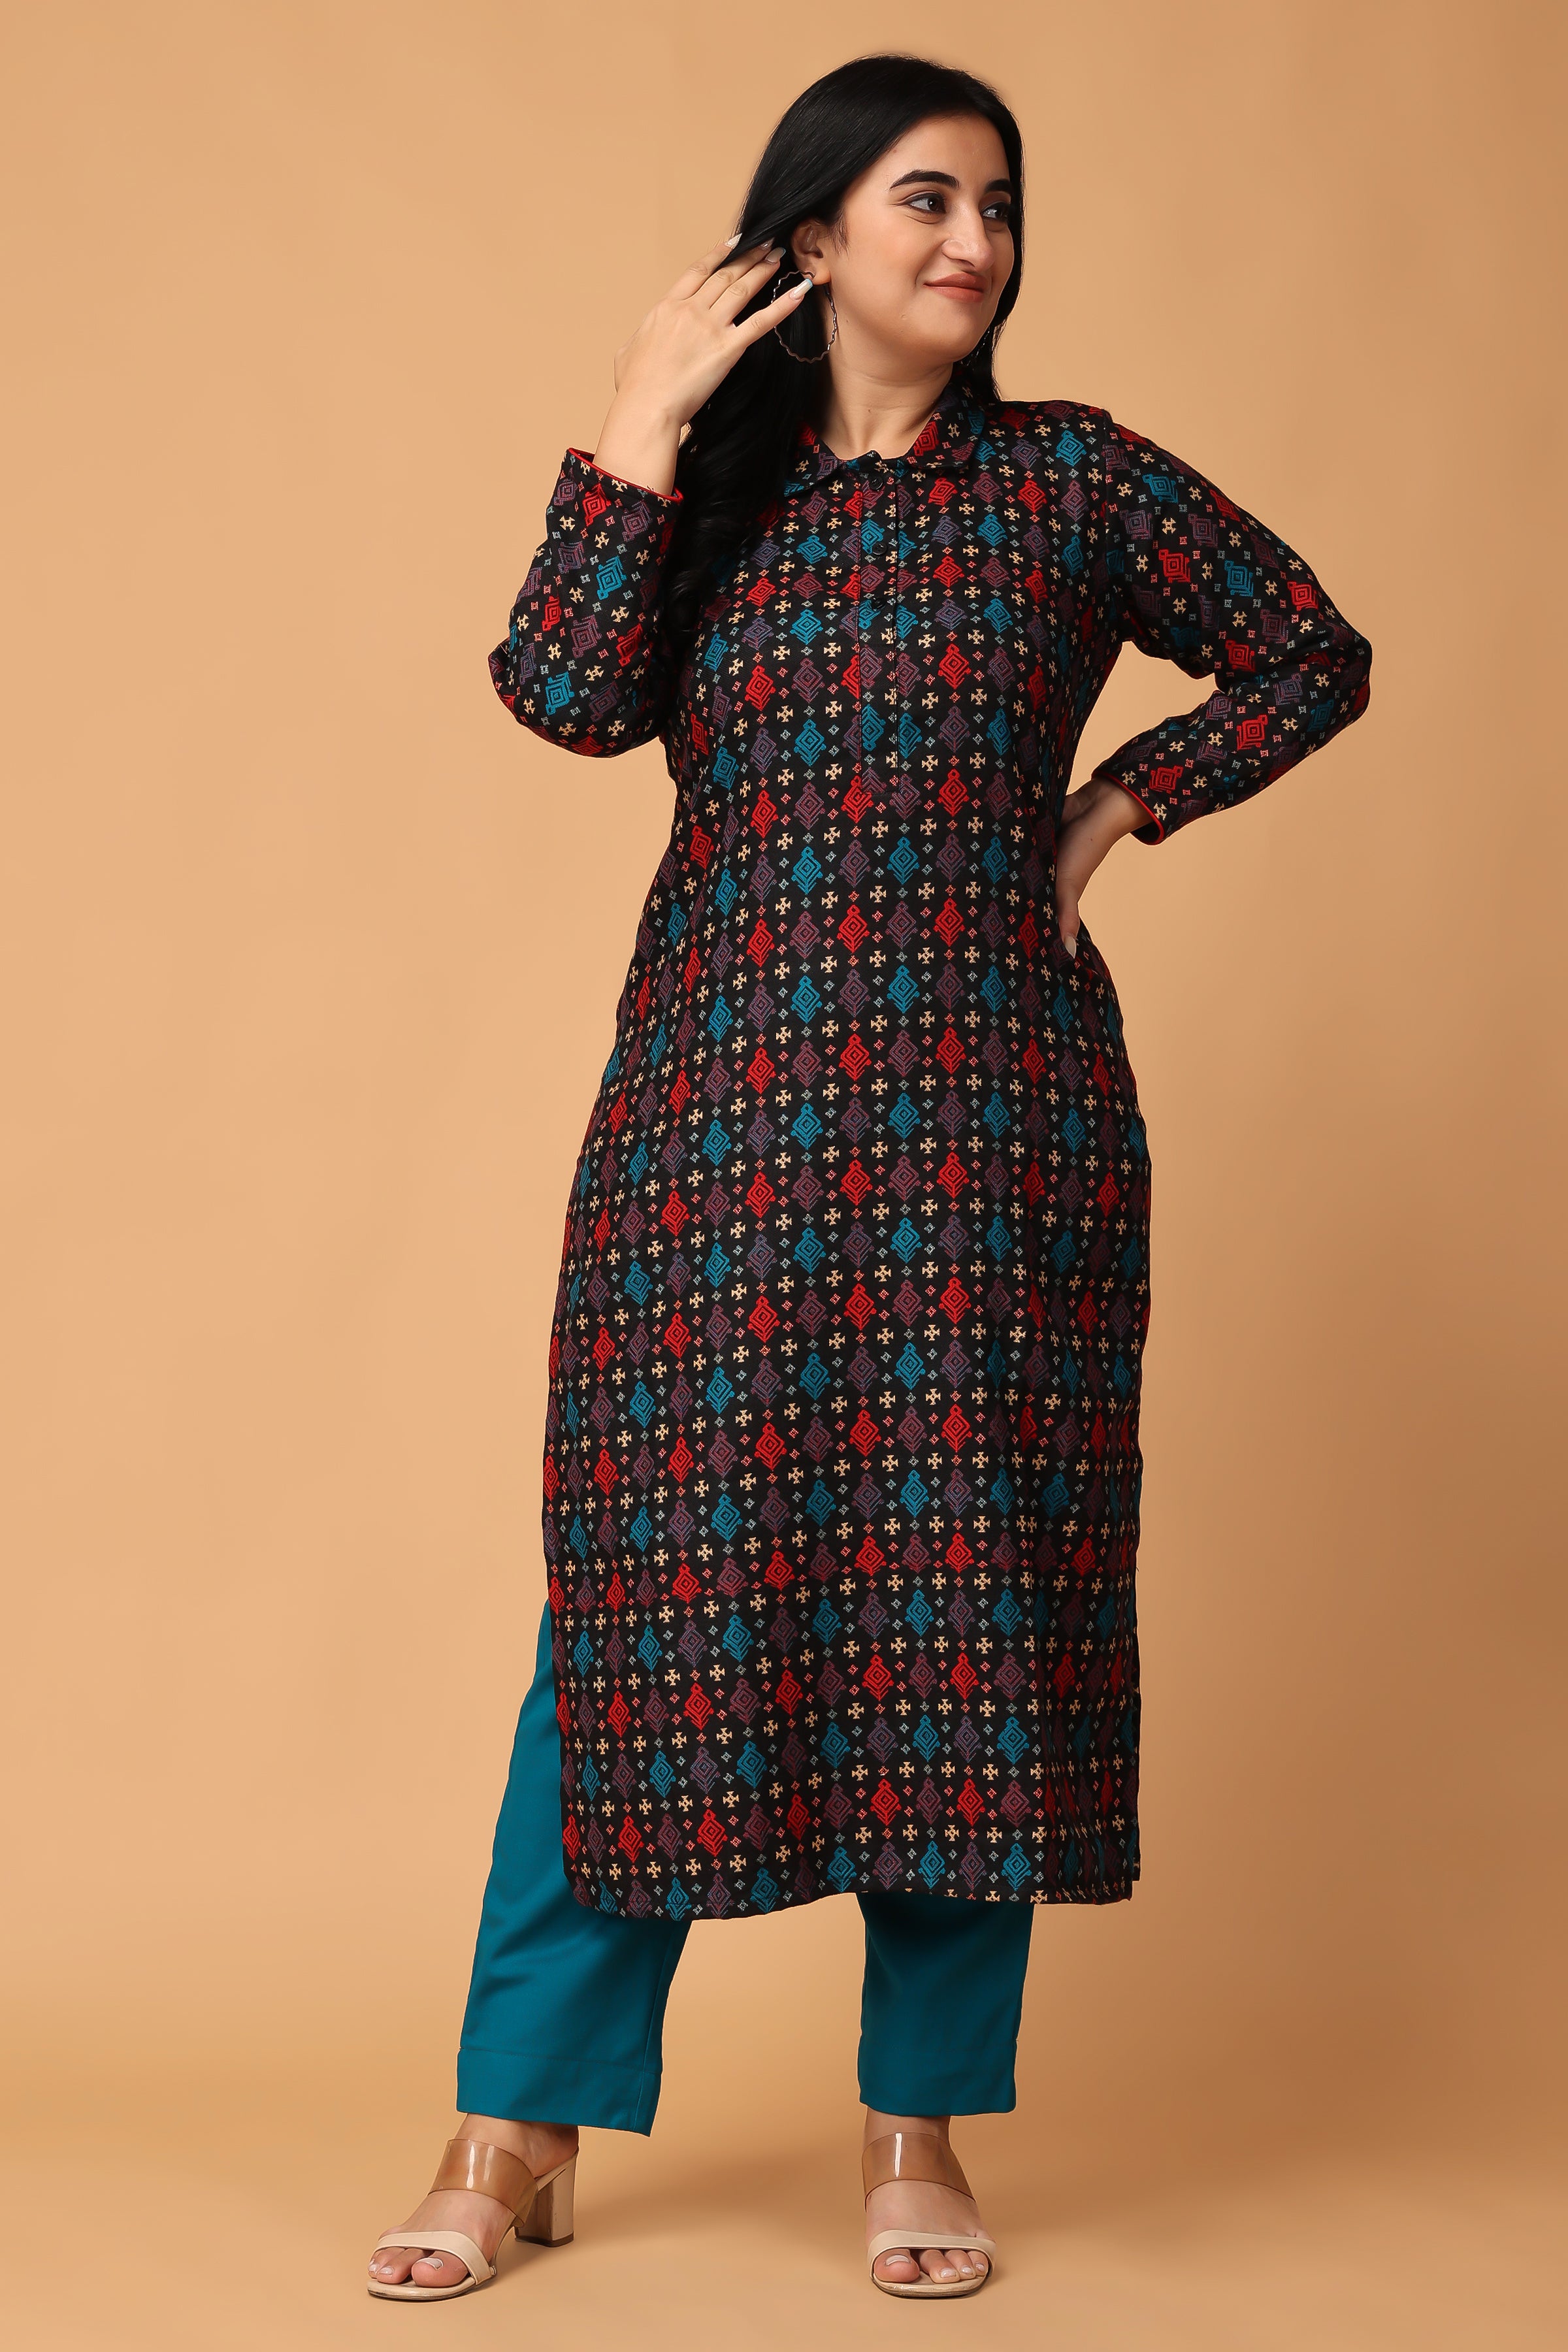 30+ stylish daily wear & party wear woolen kurti & suits design ideas/woolen  kurti & suit collection | Suits design, Winter outfits, Outfits